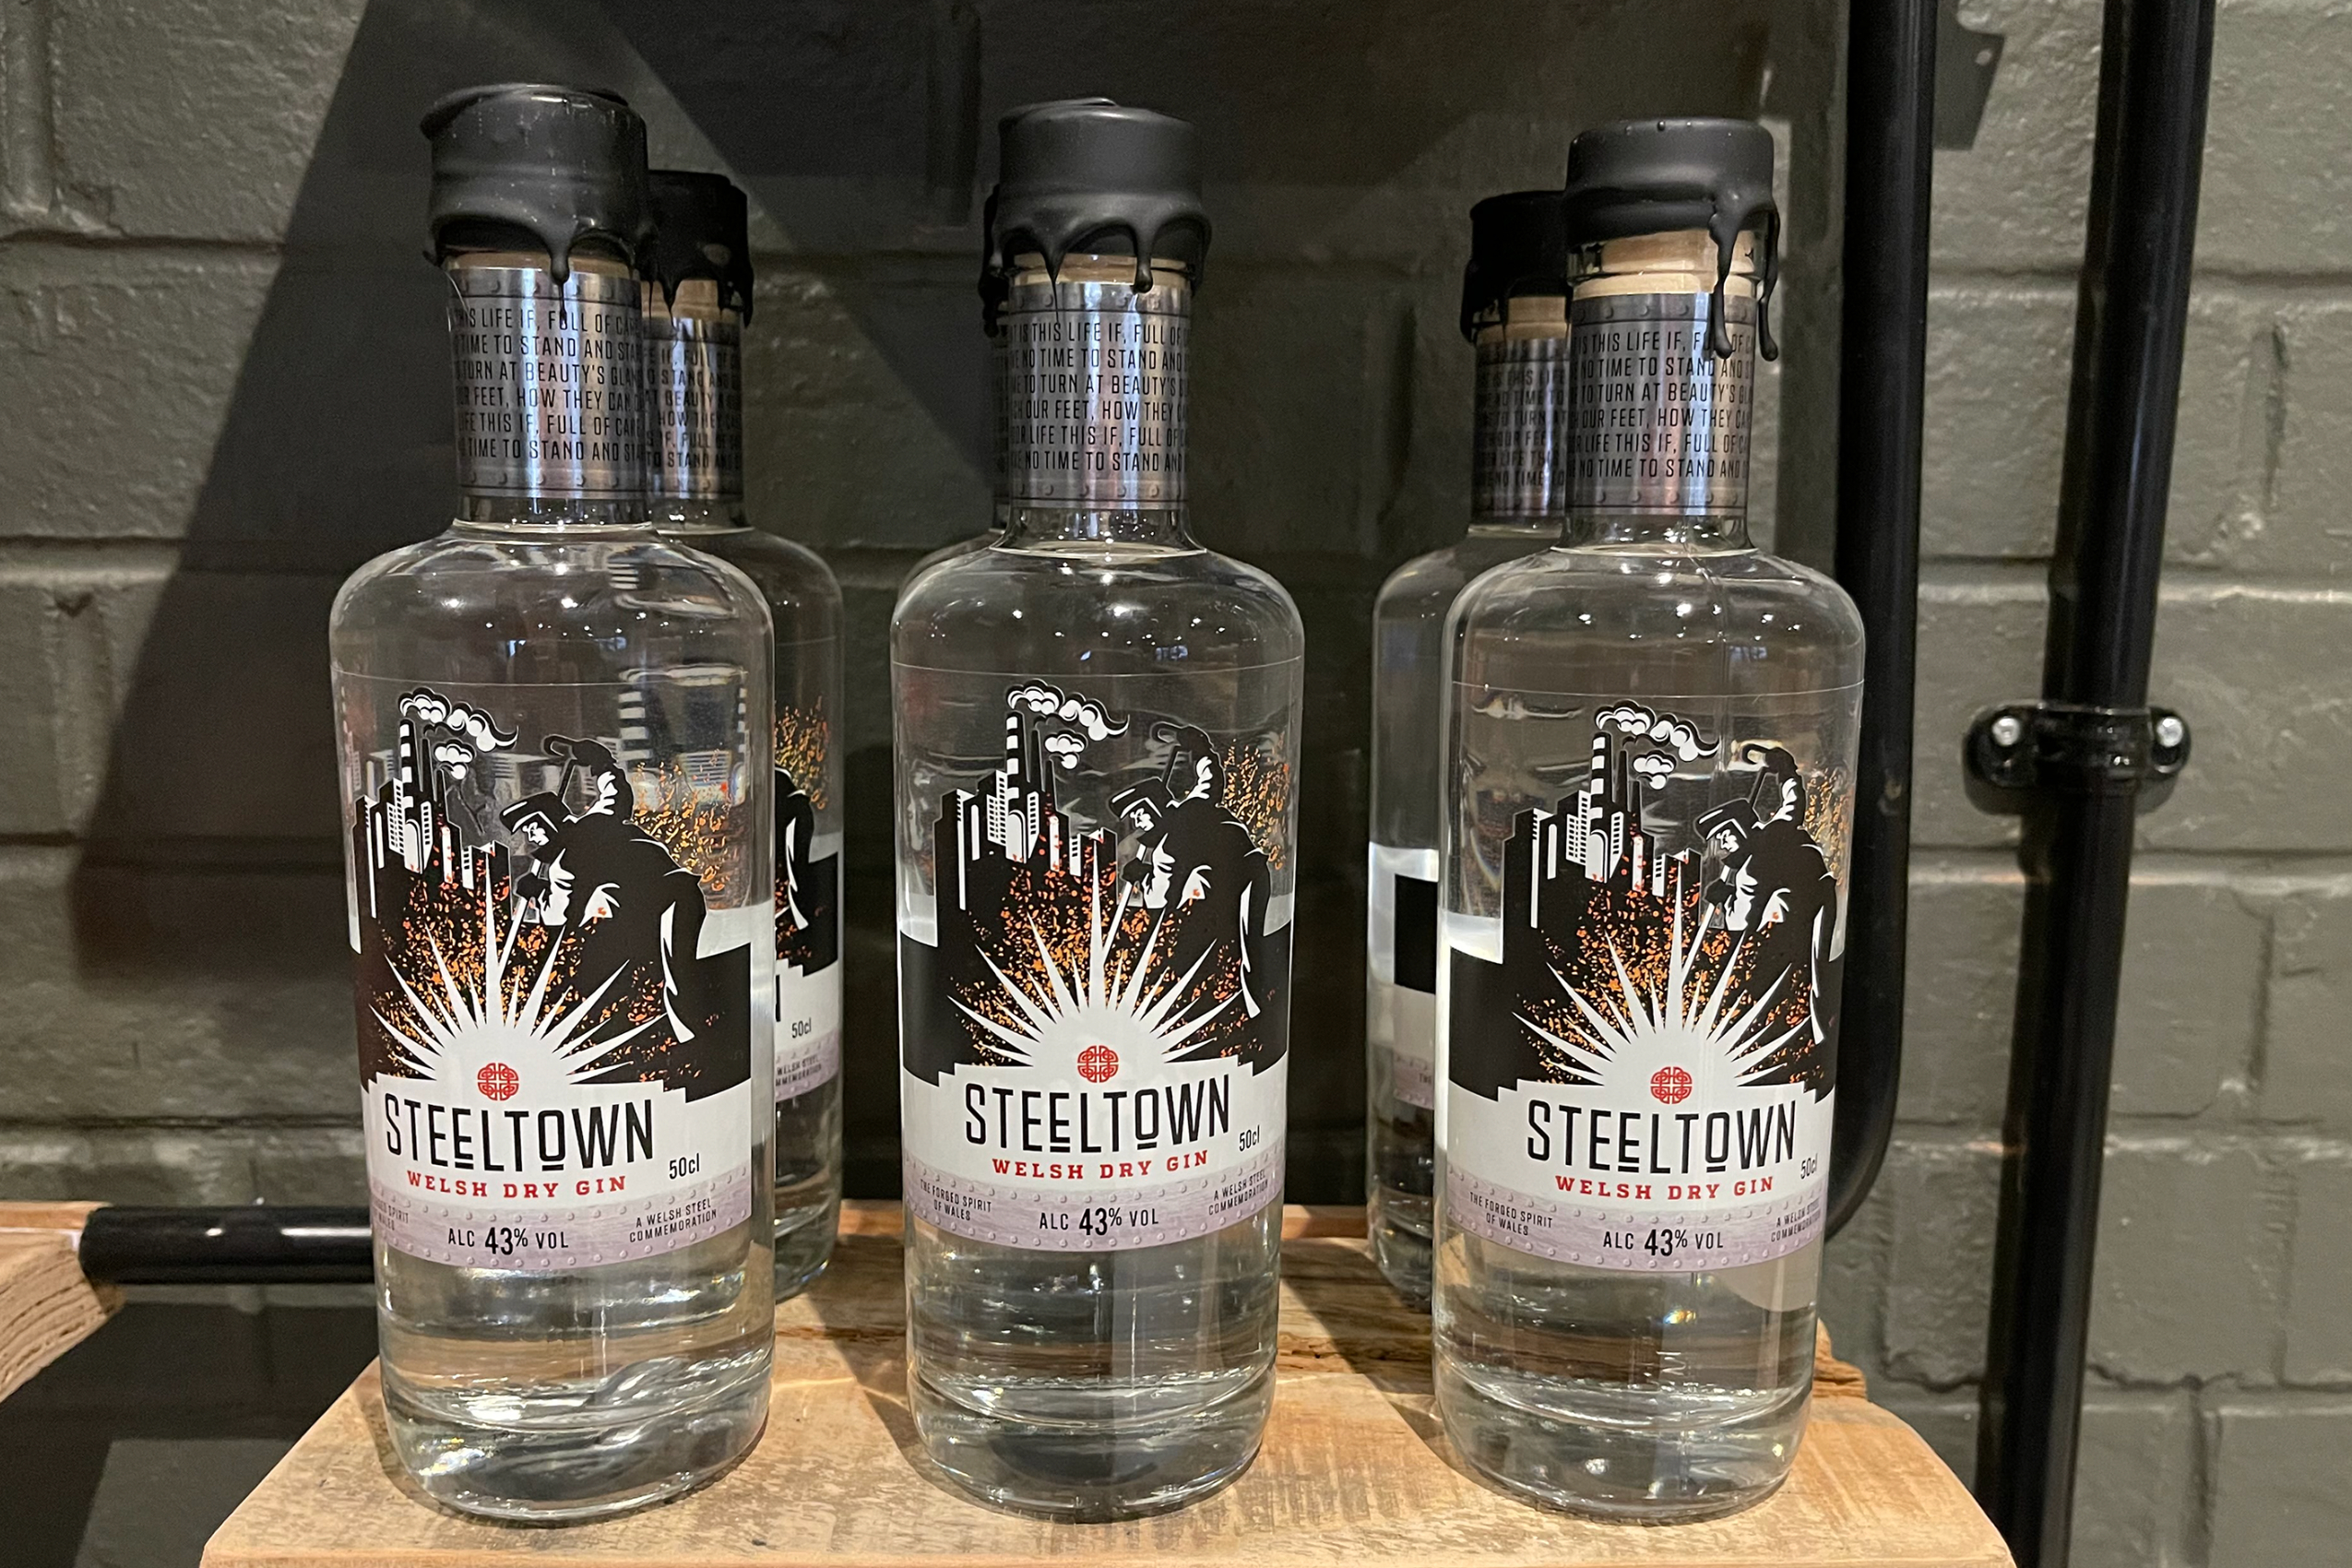 Introducing Steeltown Welsh Dry Gin with 13 delicate botanicals. Inspired by Miner's Fortnight in South Wales. 